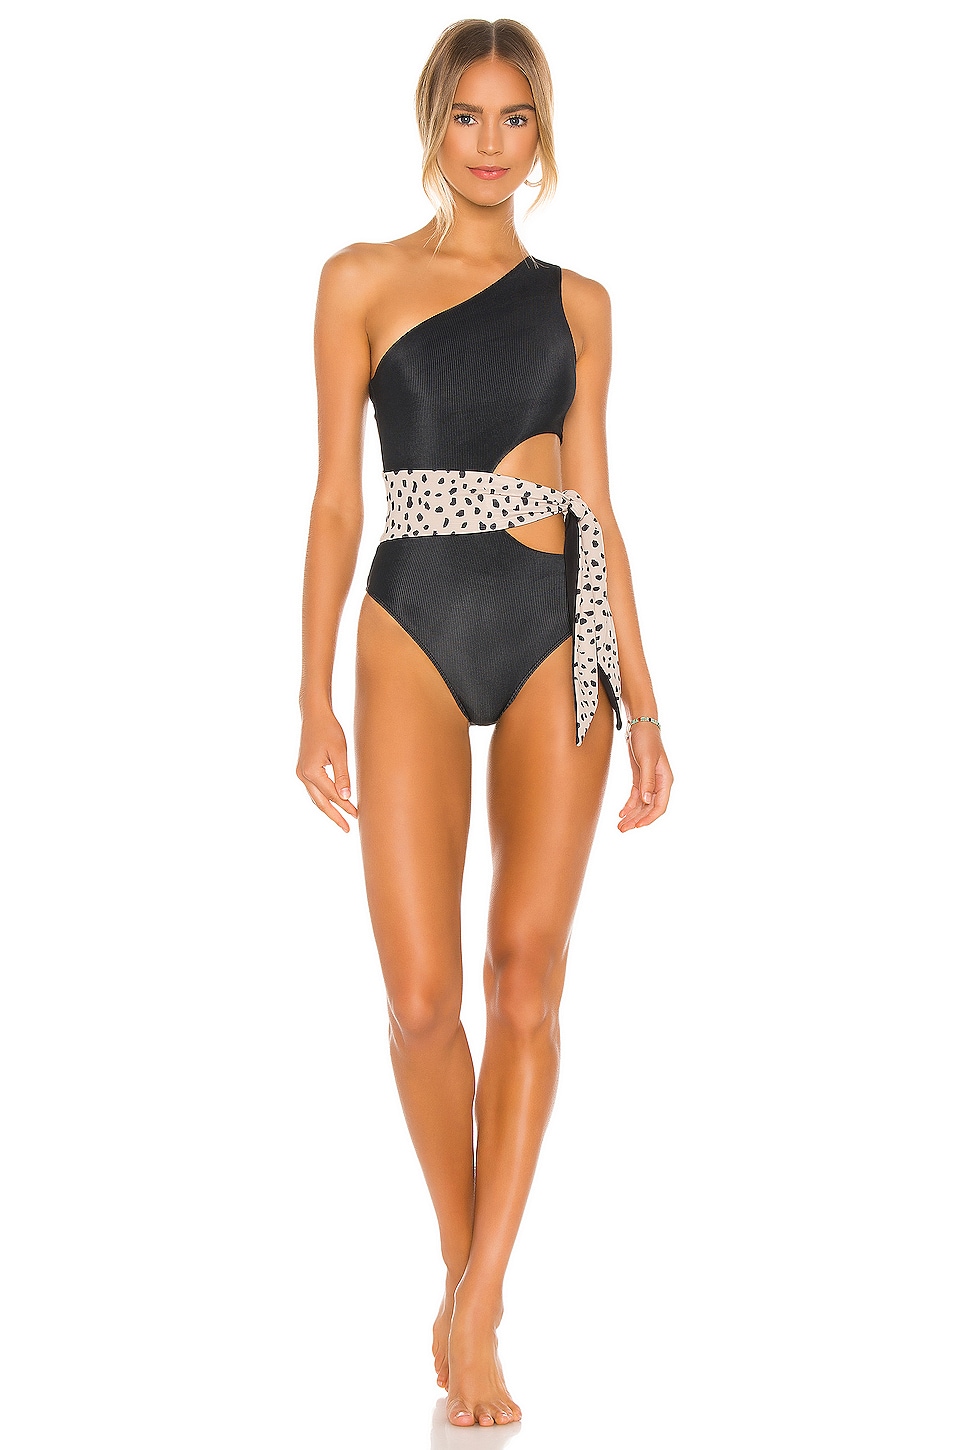 BEACH RIOT Carlie One Piece in Taupe Spot